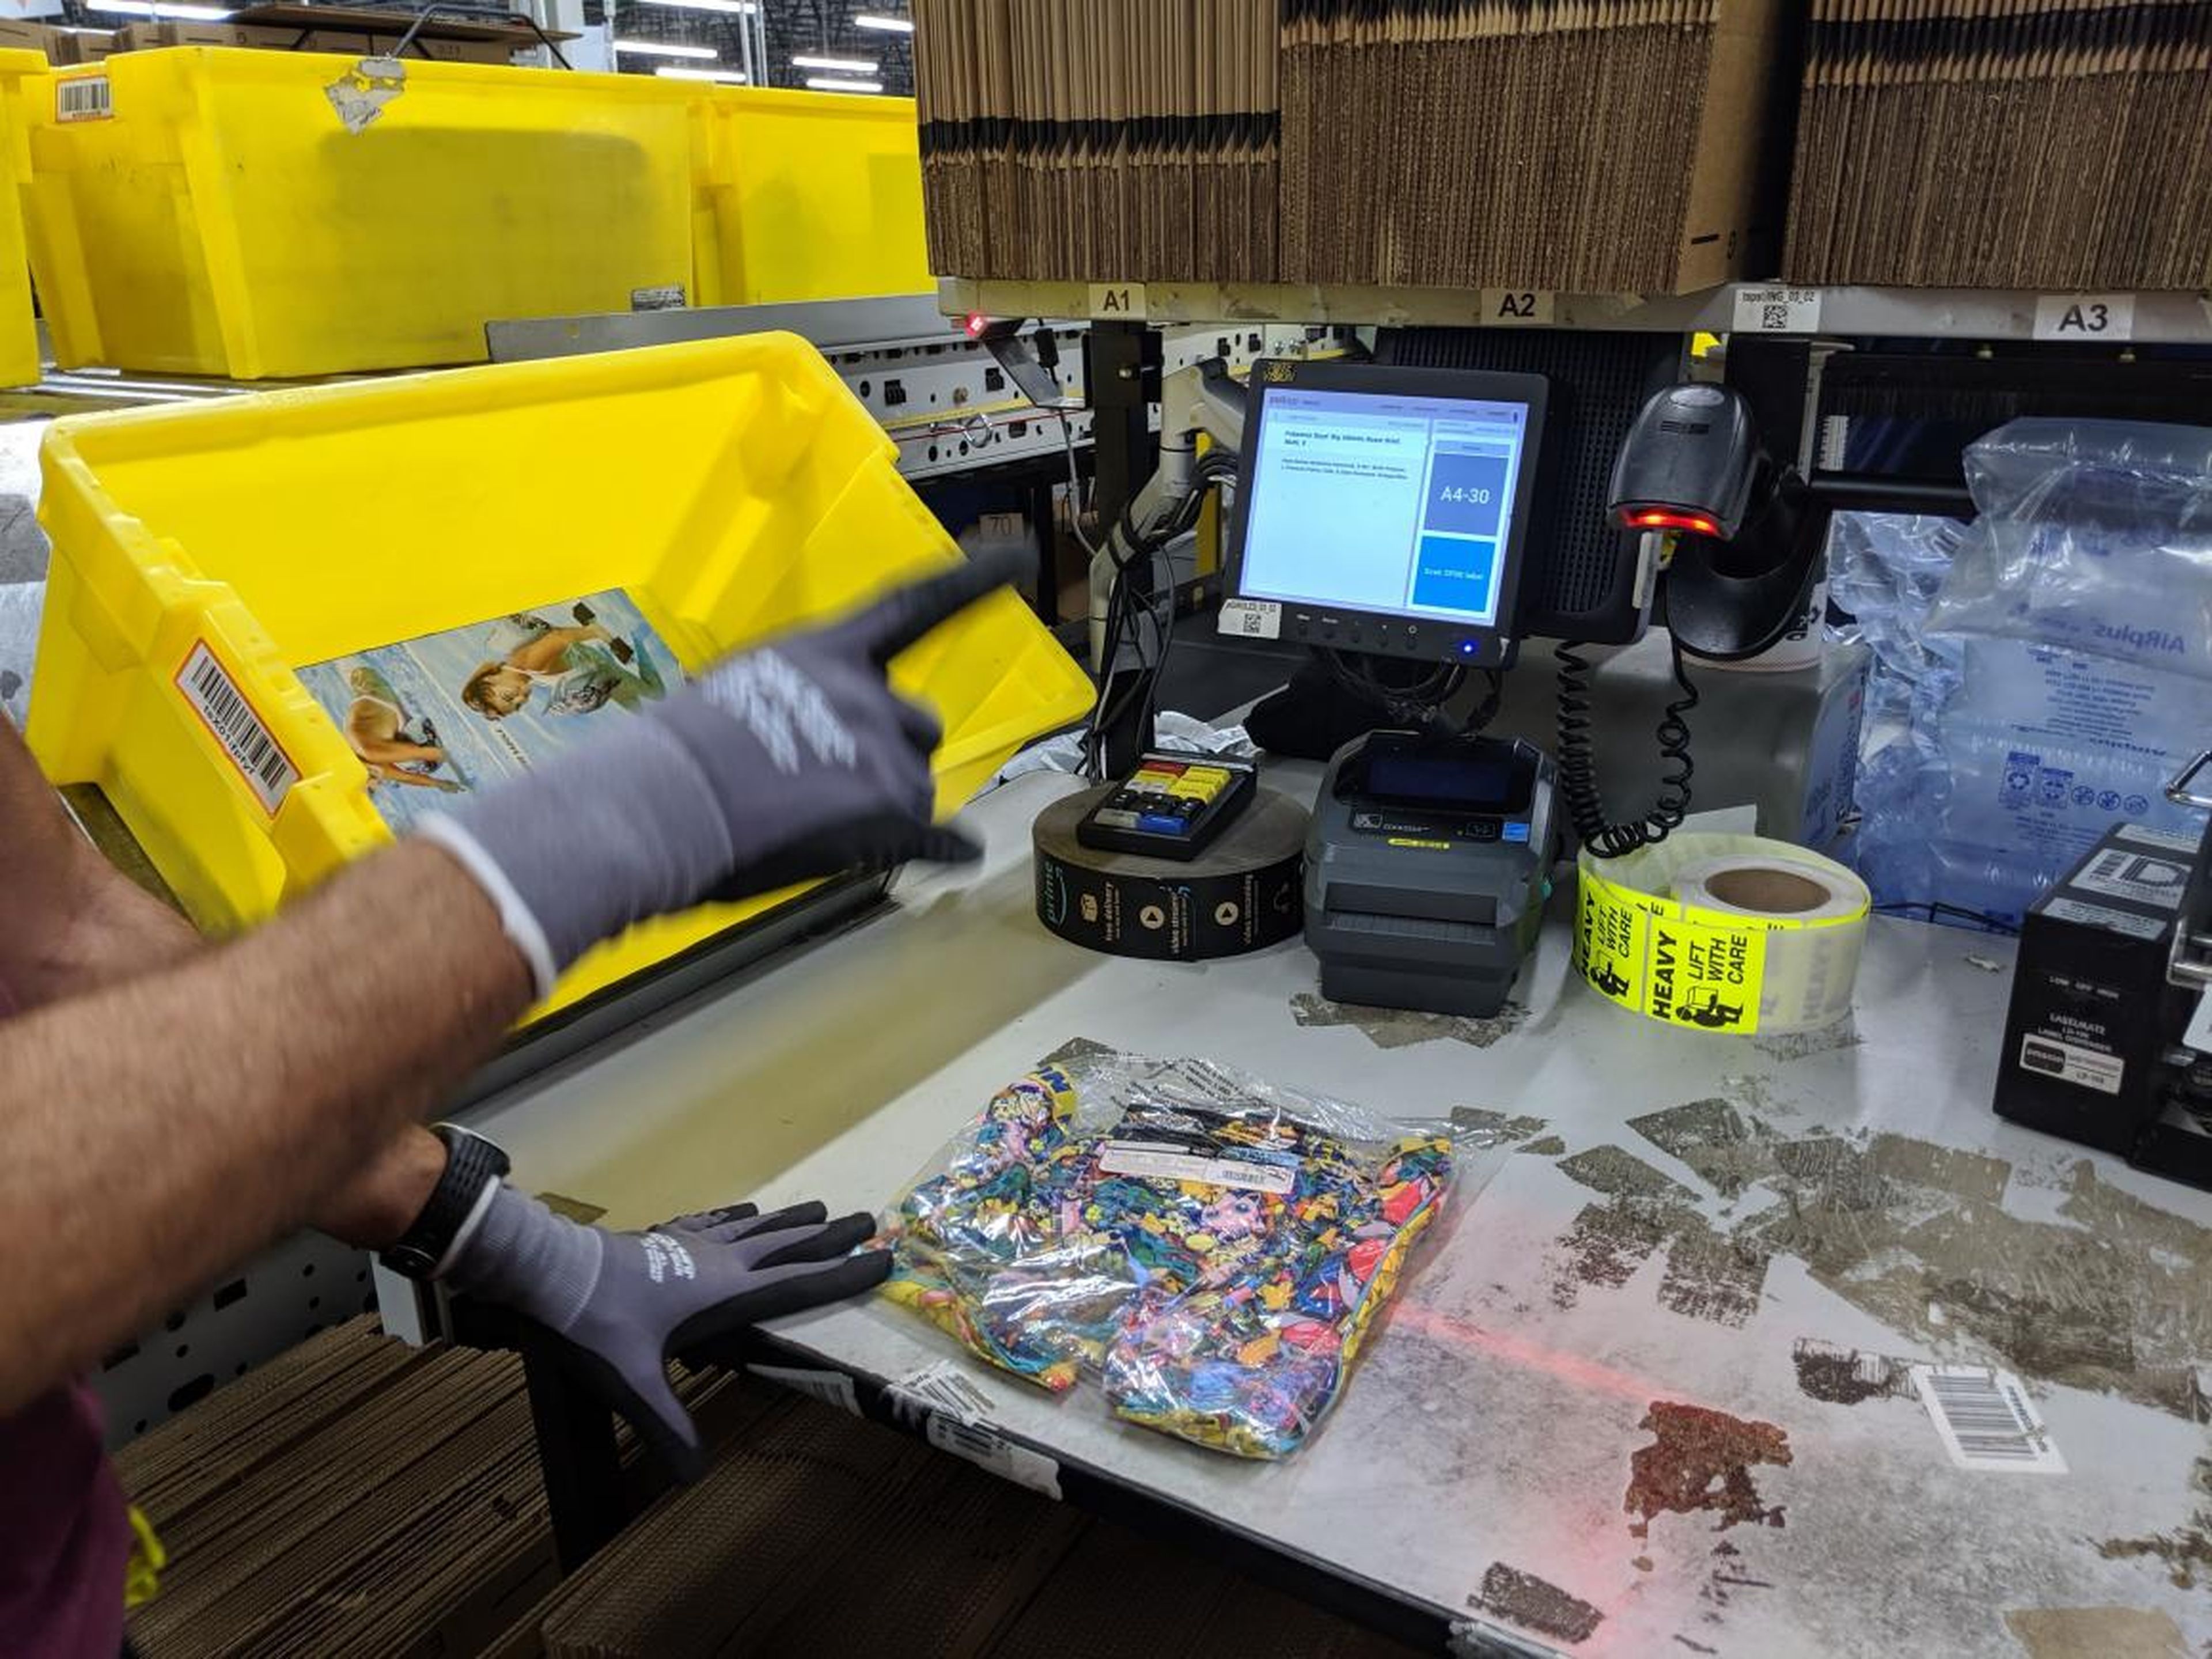 Items come into packing in the signature yellow totes, are scanned, and a bunch of information pops up telling the packer which type of box to use.